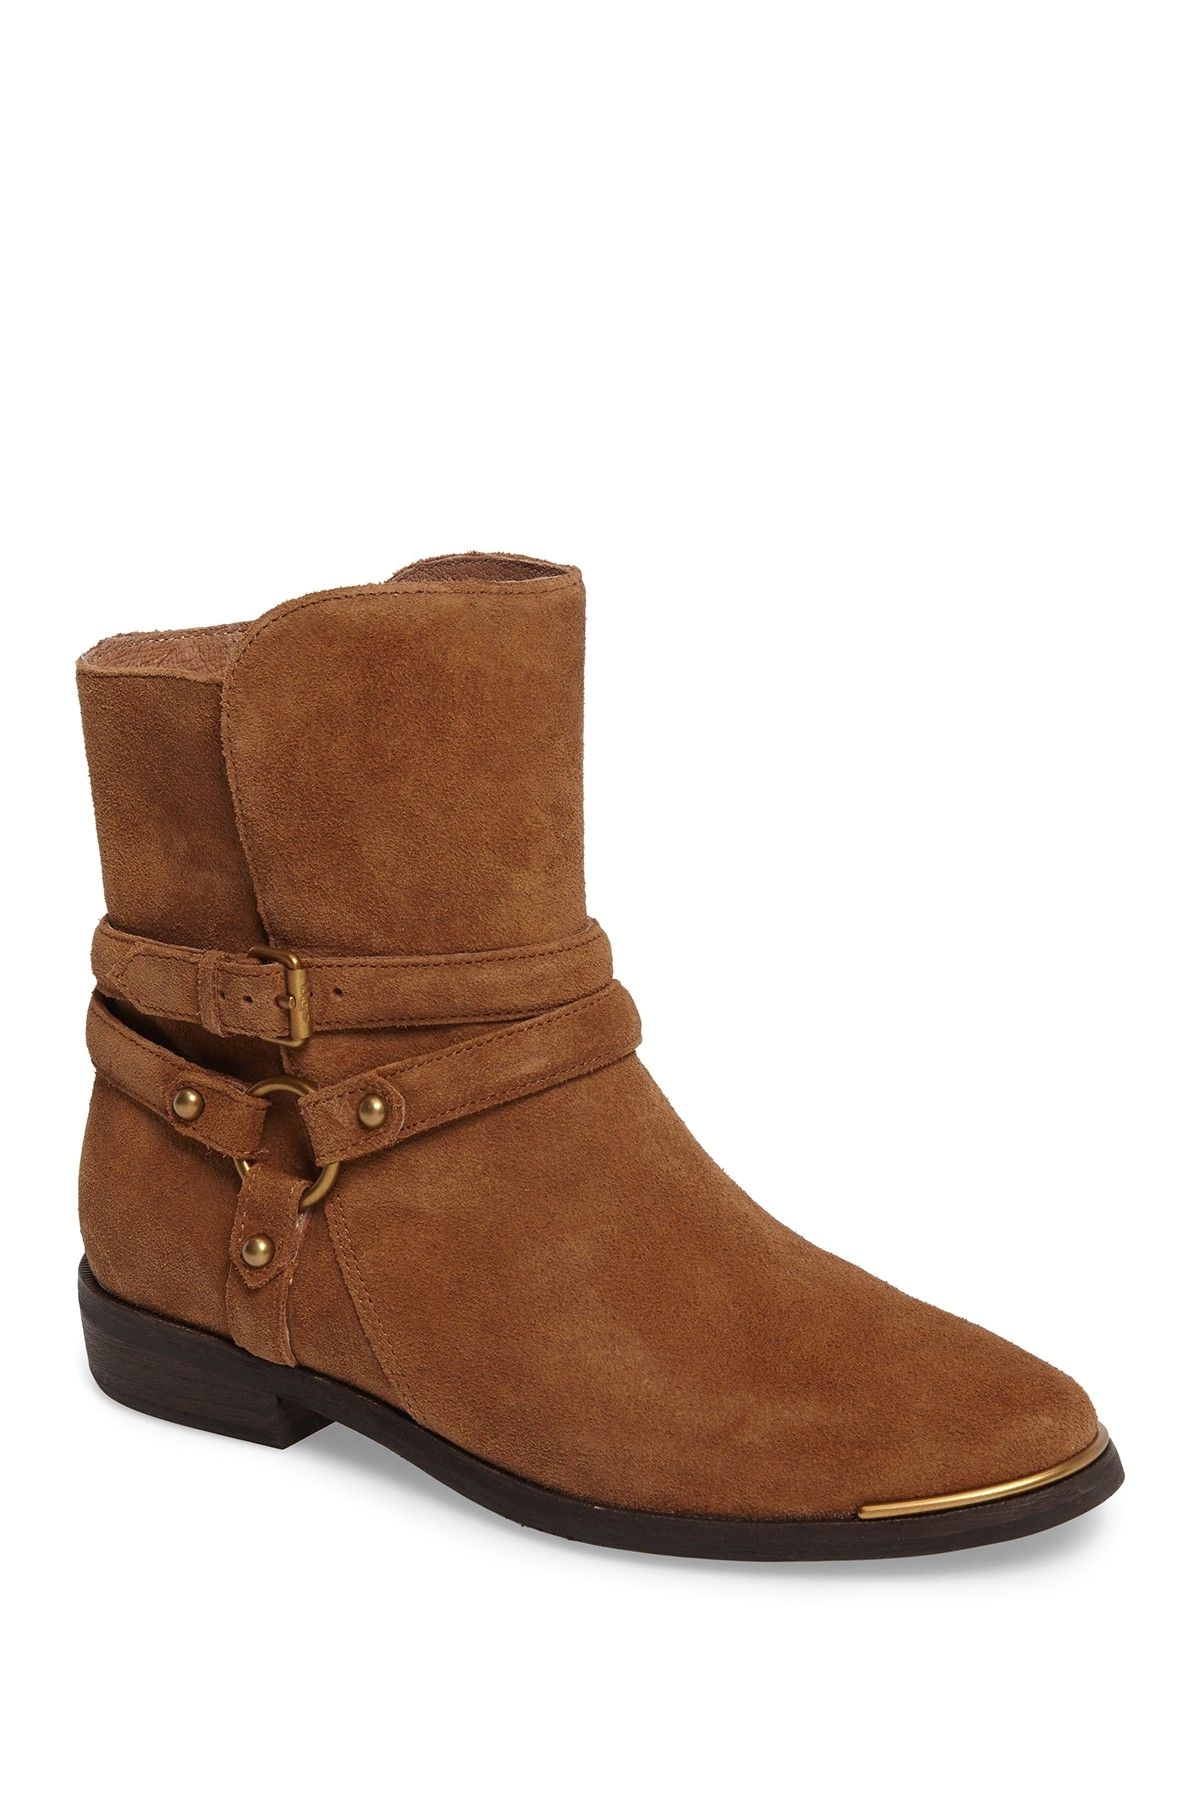 kelby suede boot